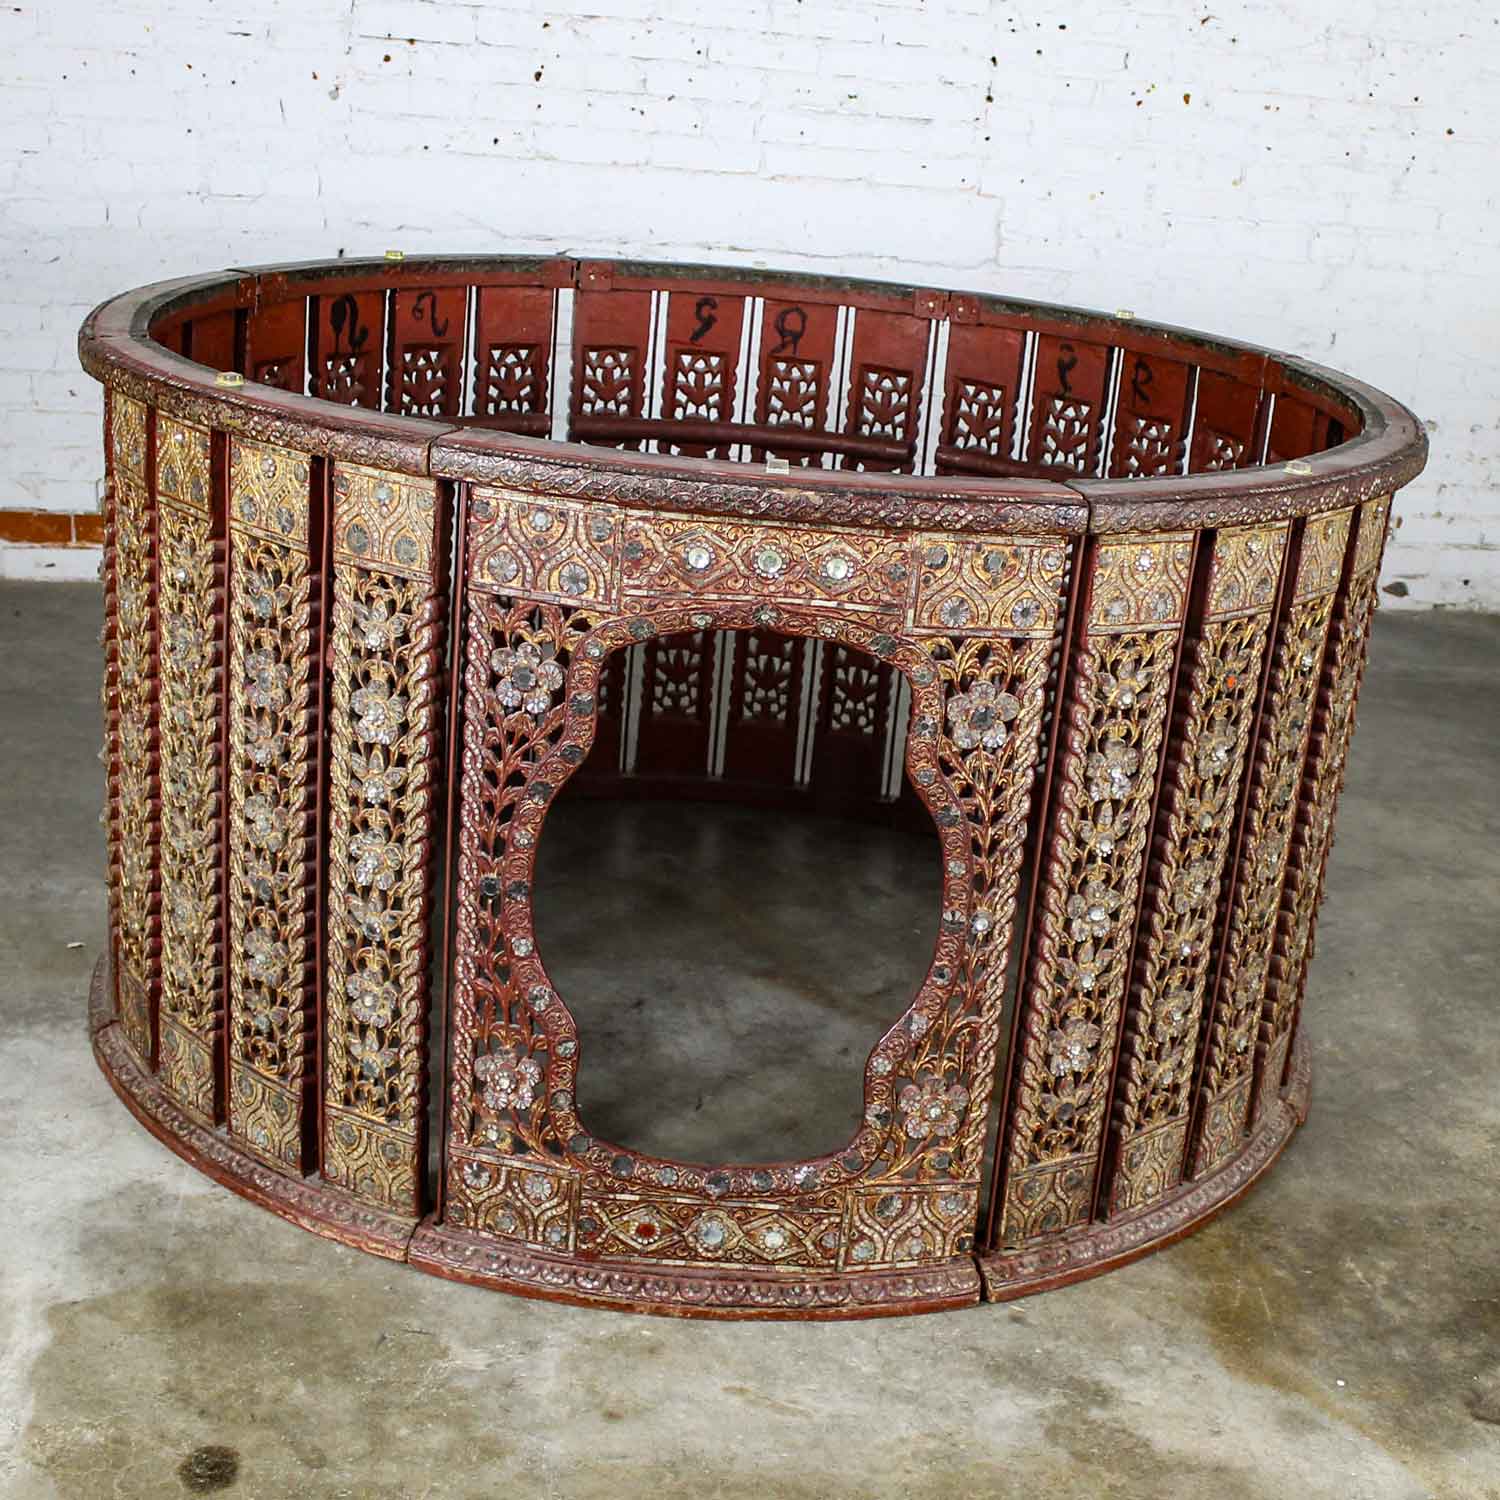 Antique Burmese Orchestra Hsian Wain Drum/Percussion Circle Carved Panel Table with Rectangular Glass Top & 15 Myanmar Drums